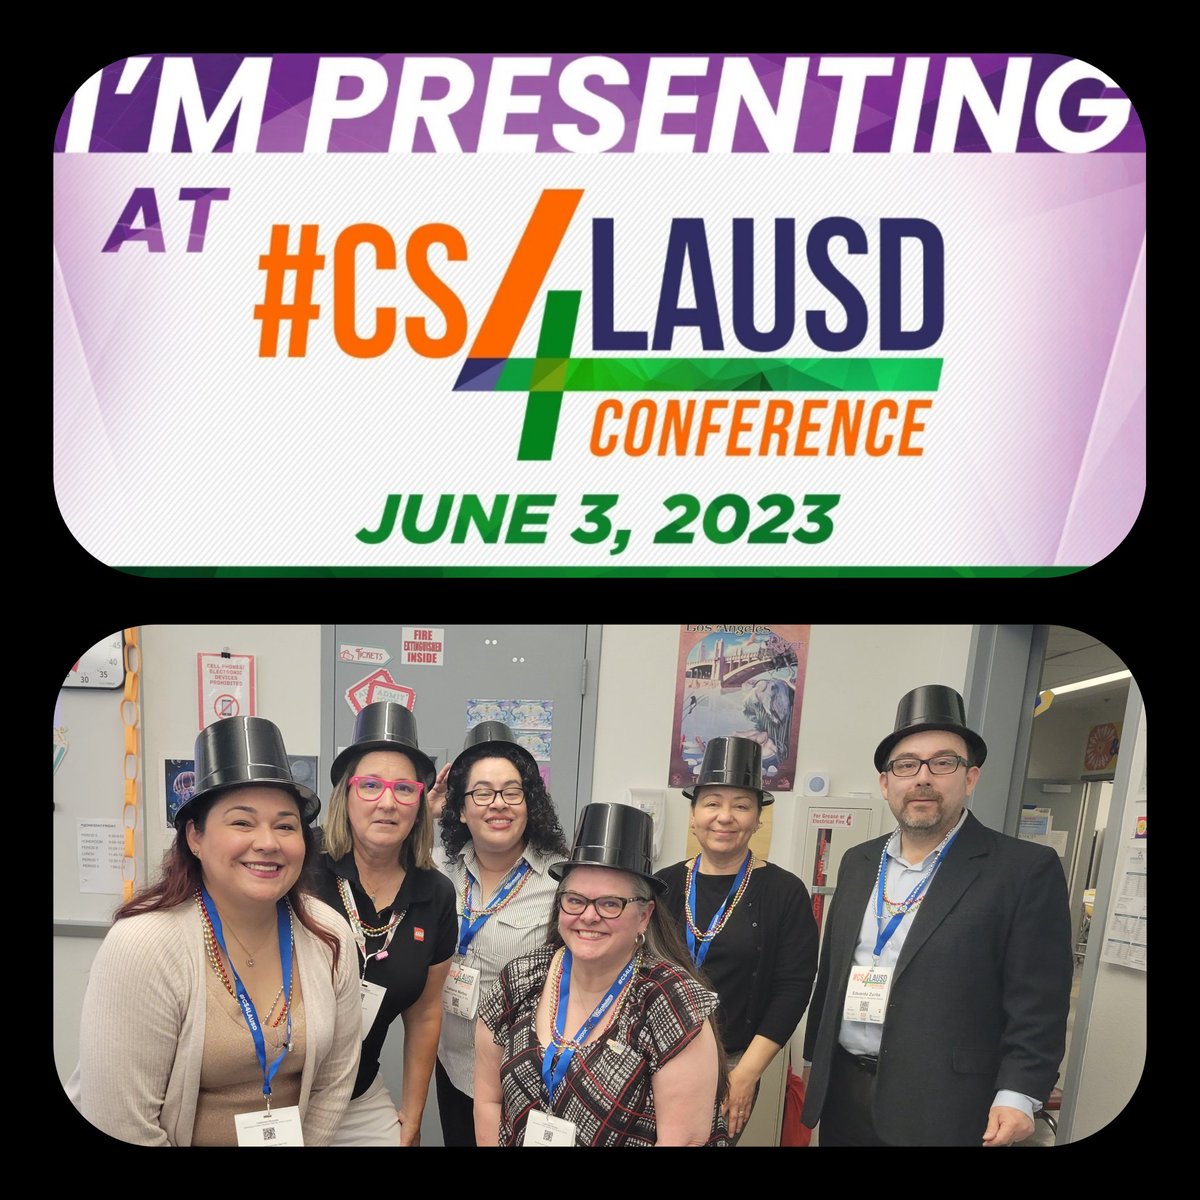 So excited to be presenting along with @LEGO_Education at today's @ITI_LAUSD #CS4LAUSD conference. How lucky to present with a room full of #teacherbesties! #PLN #edtech #itflife #LEGOConfidence #edtechcoach #escaperoom